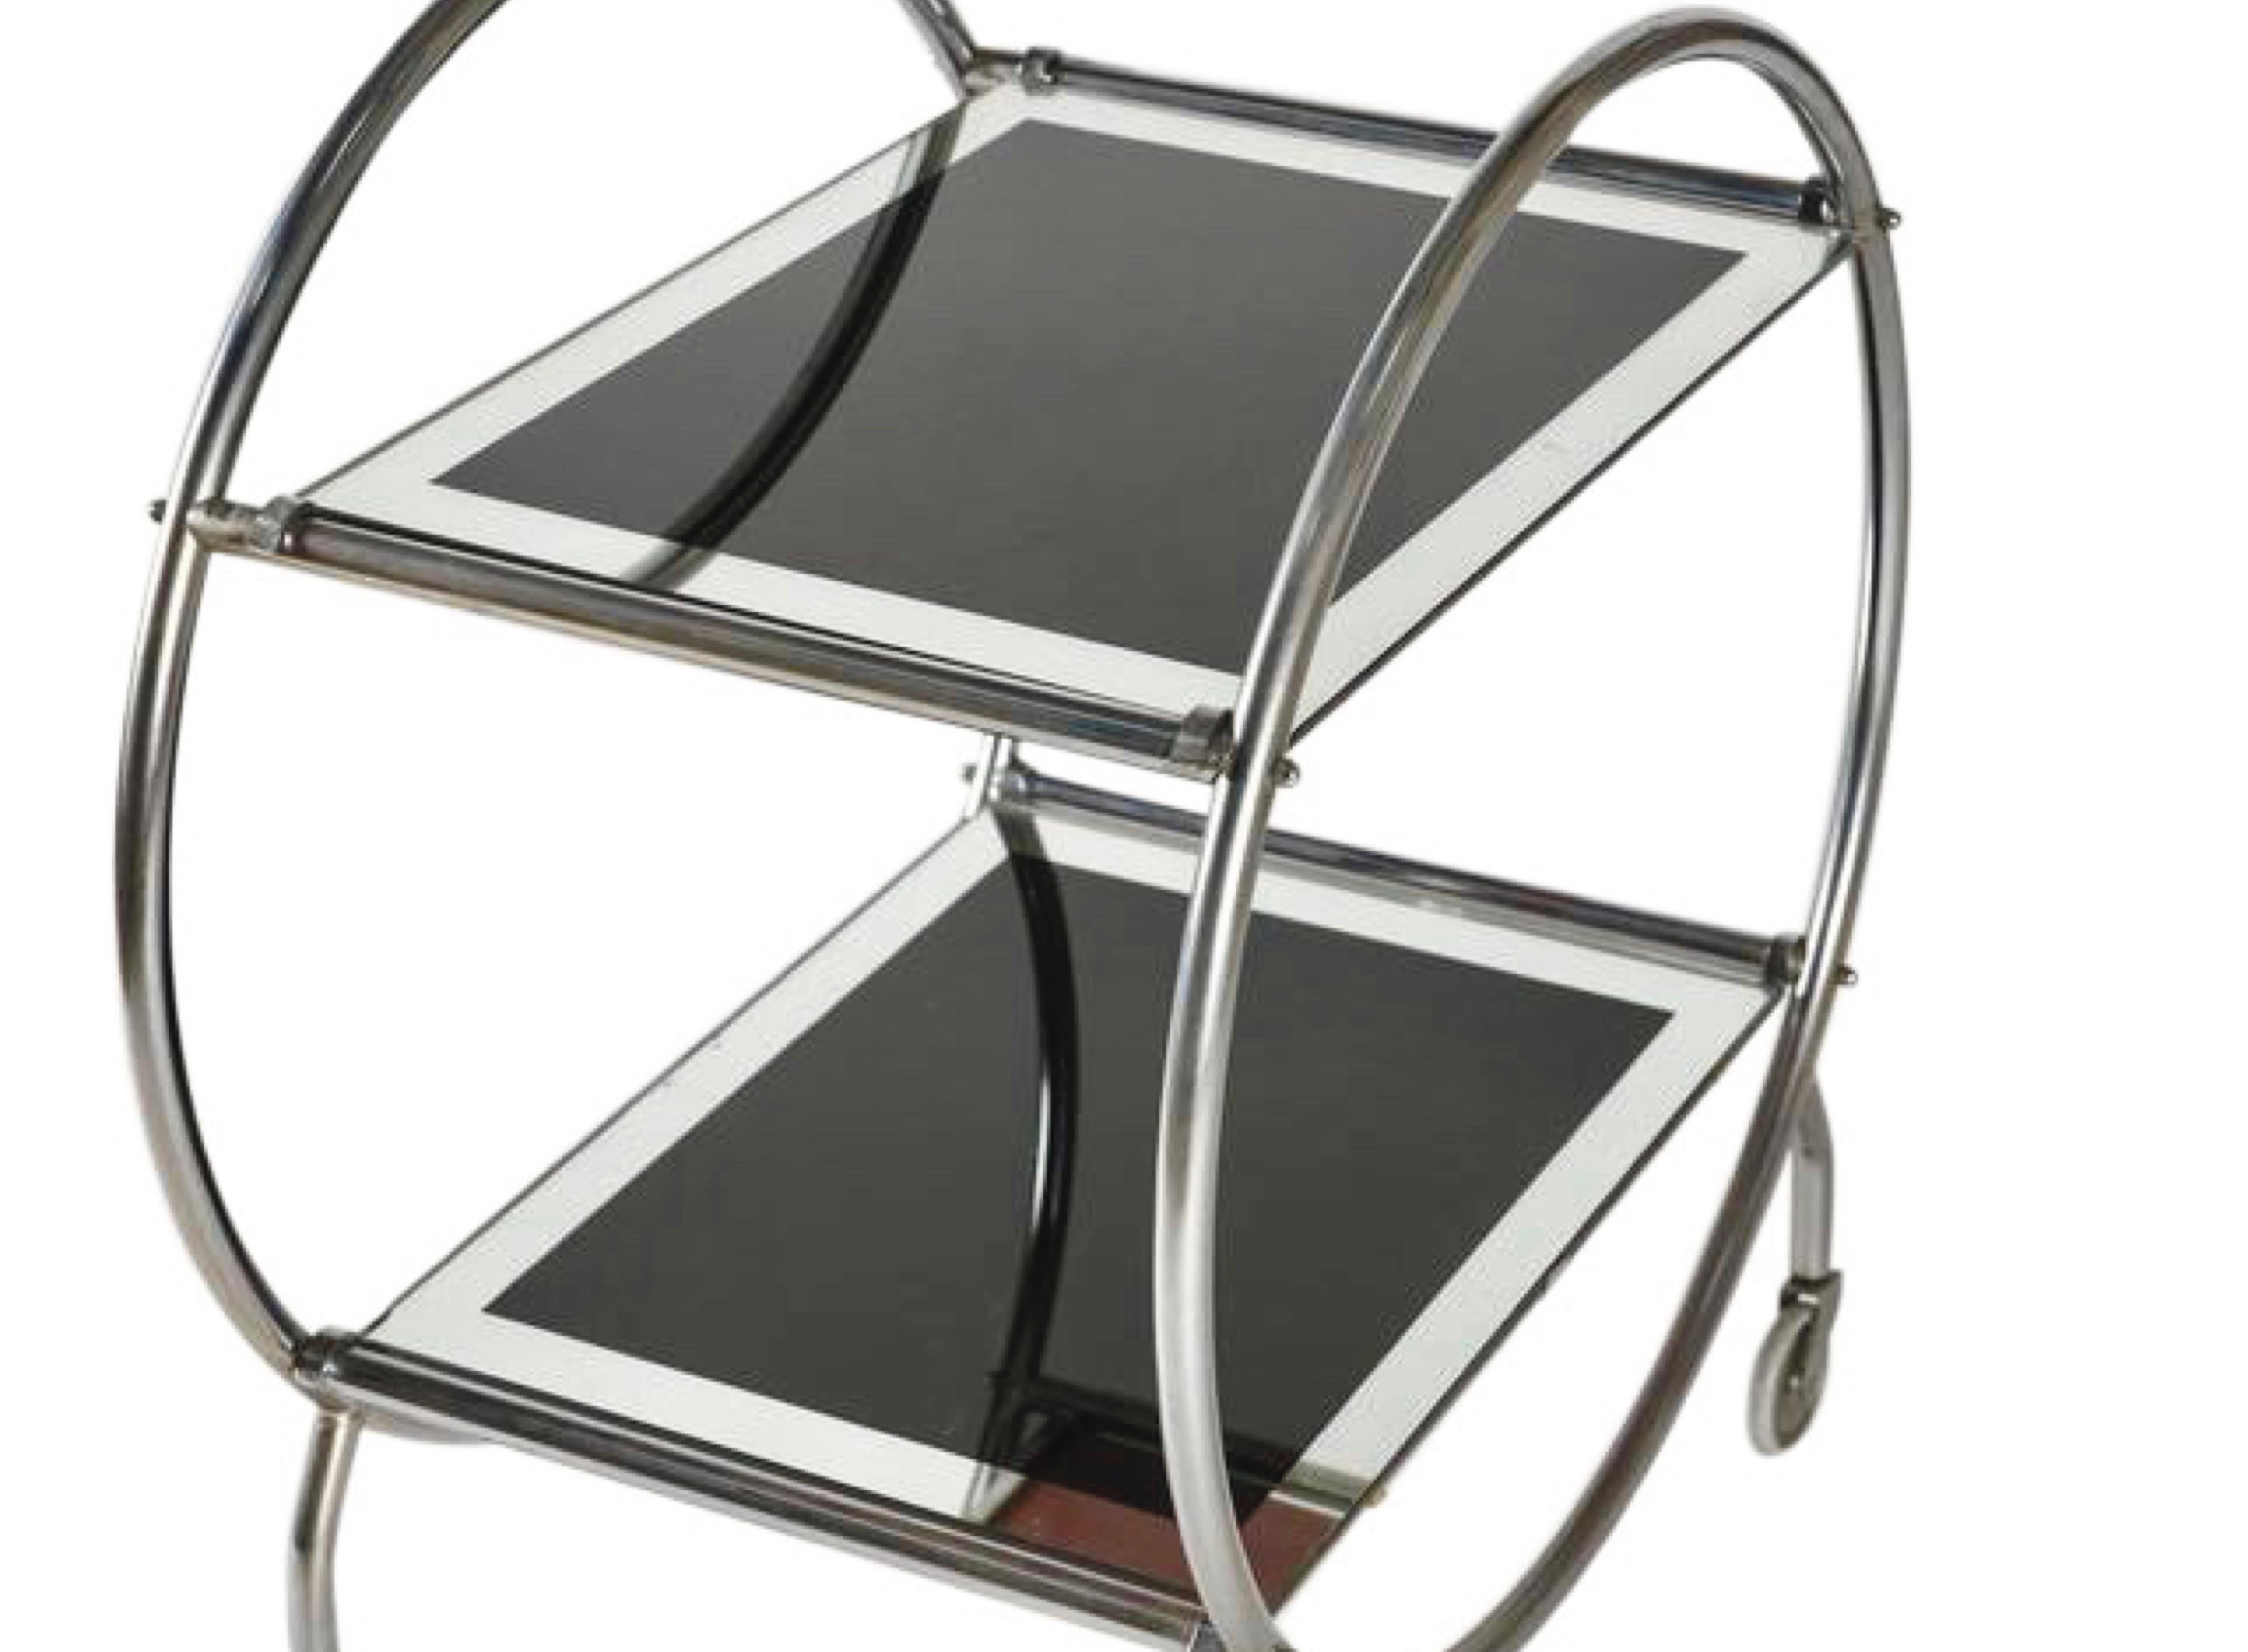 Art Deco Round English Bar Cart in Original Chrome with Glass Shelves, 1930s For Sale